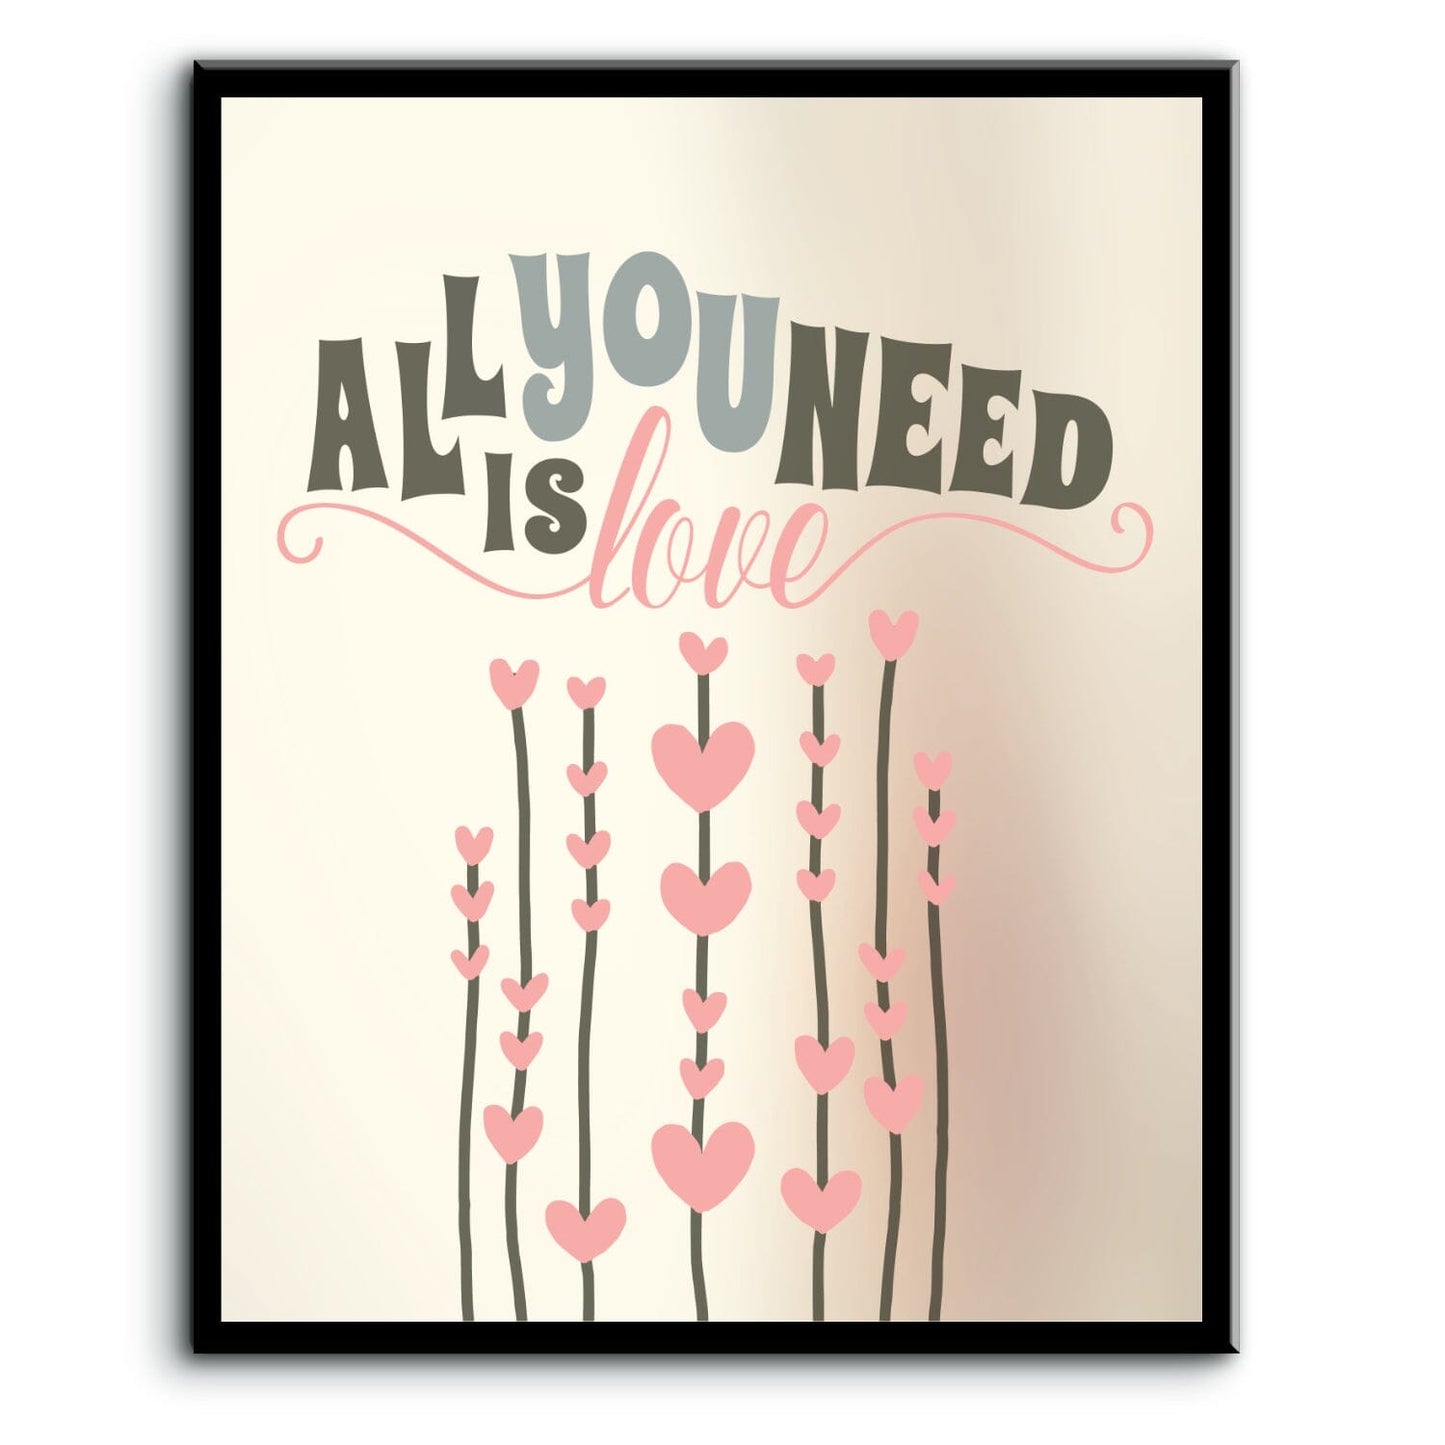 All You Need is Love by the Beatles - Song Lyric Art Print Song Lyrics Art Song Lyrics Art 8x10 Plaque Mount 